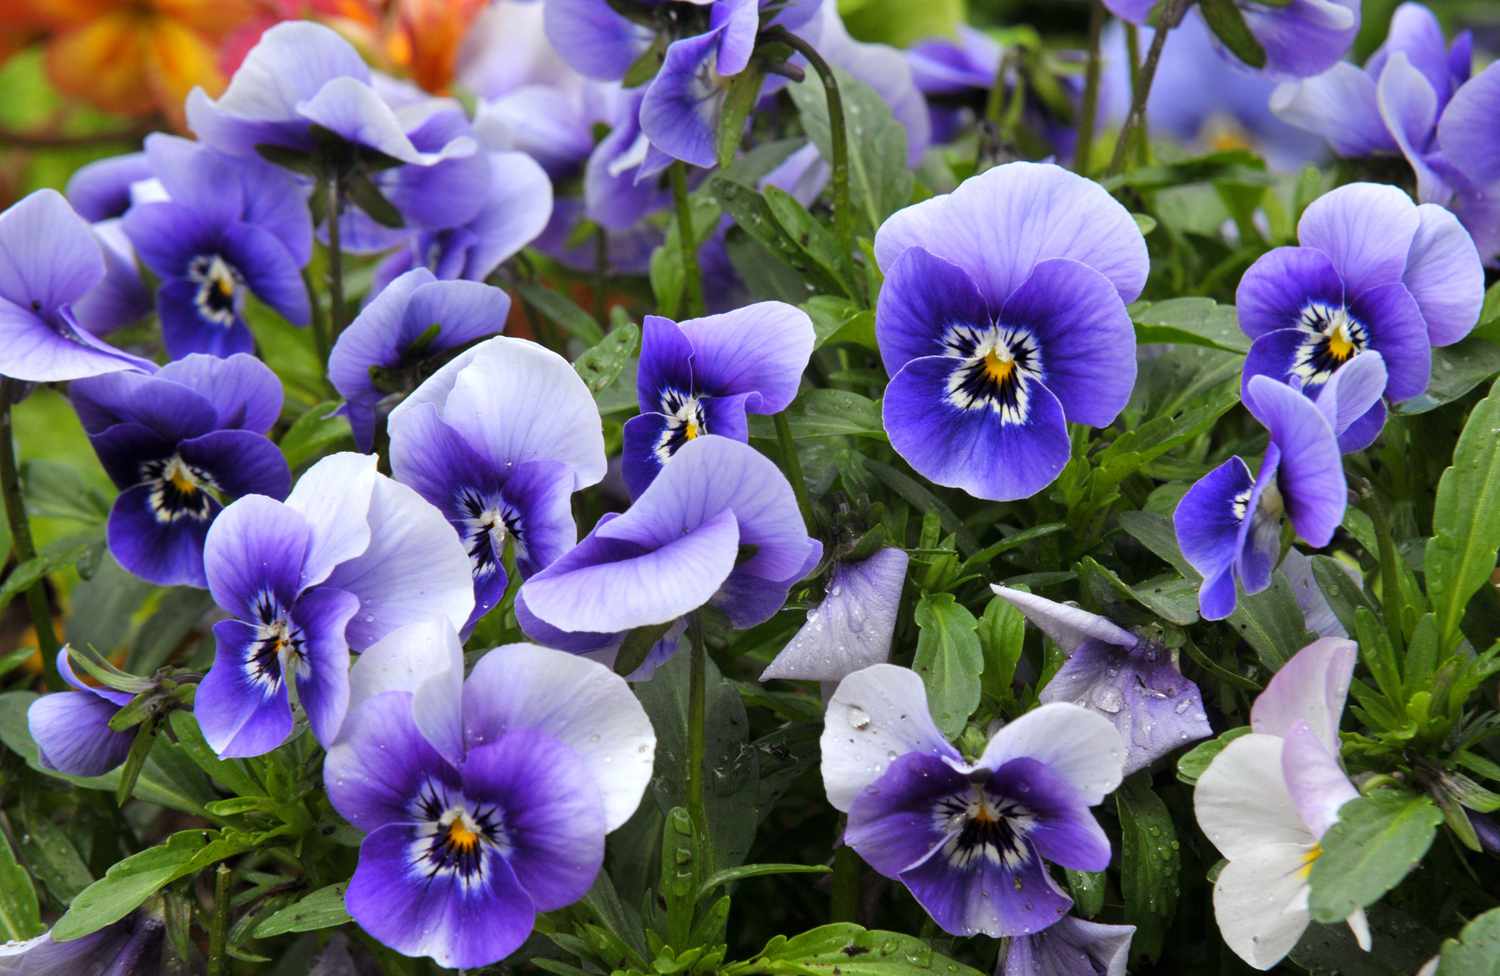 Pansy plant with purple and white flowers closeup